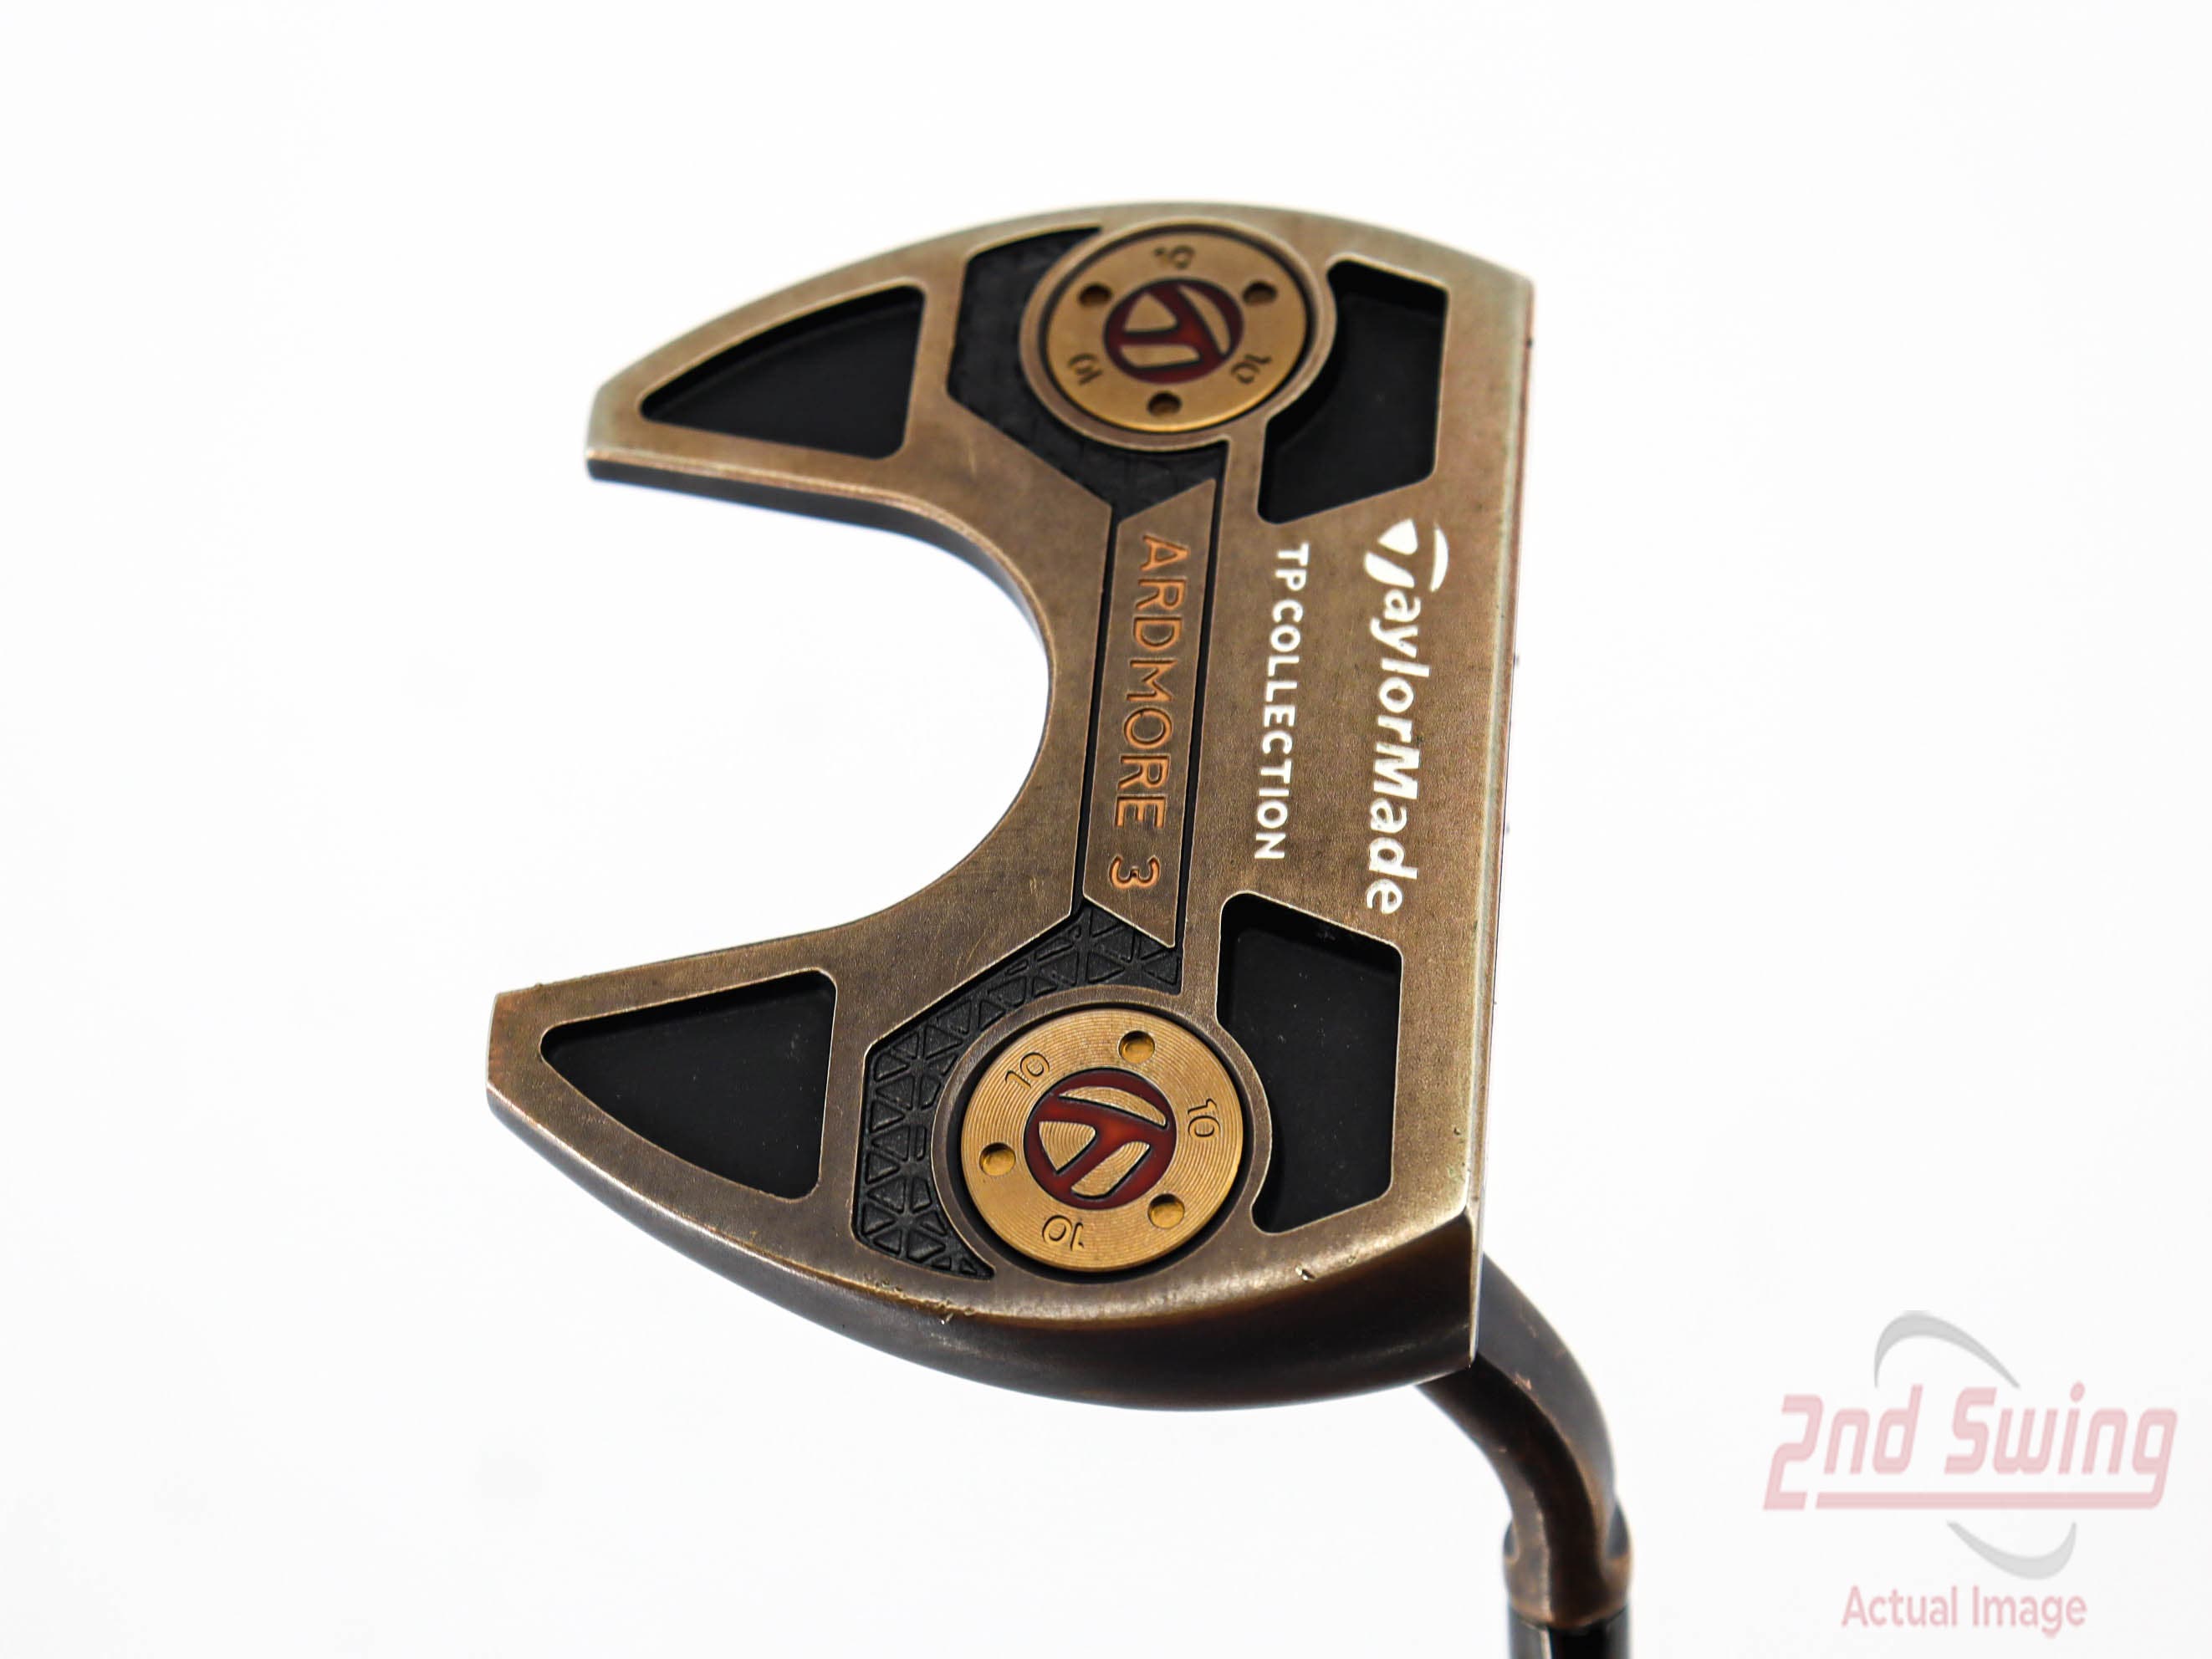 TaylorMade TP Black Copper Ardmore 3 Putter | 2nd Swing Golf